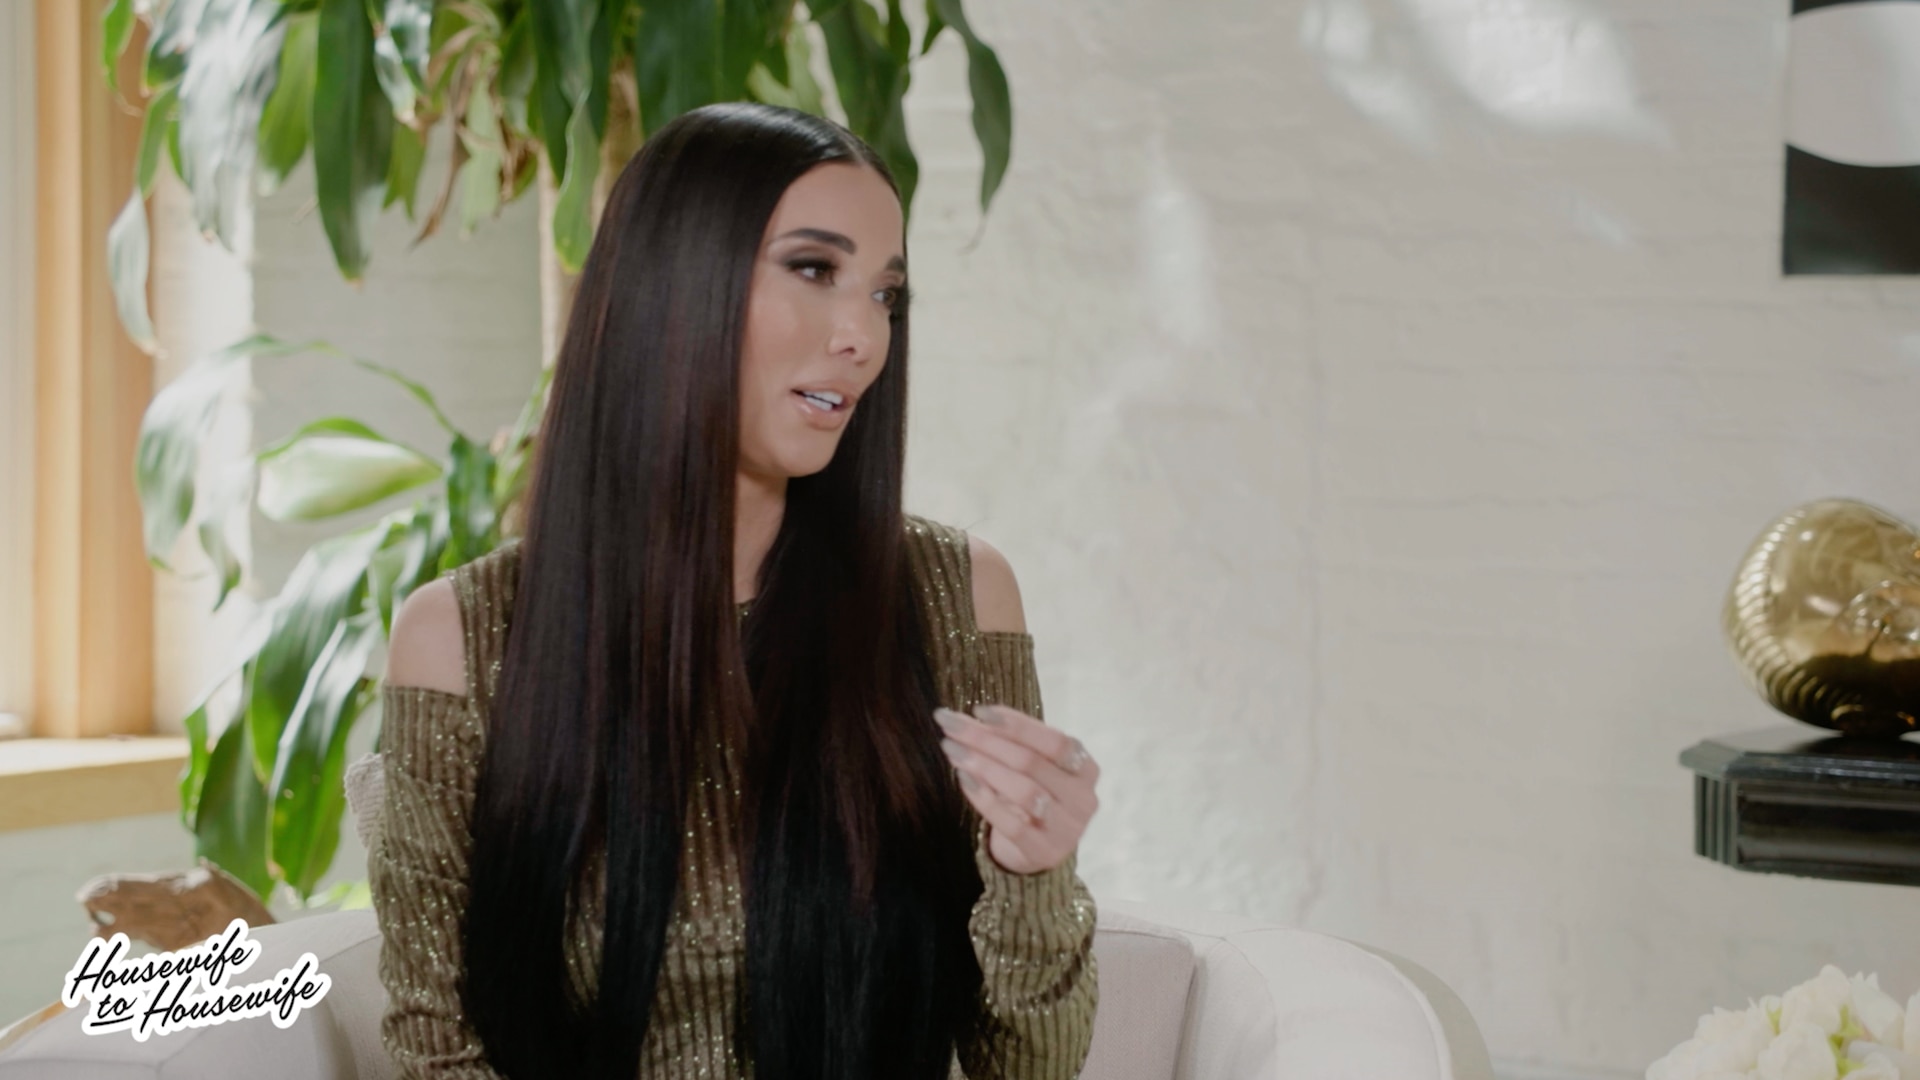 Noella Bergener "Goes Deeper" Into a Moment on RHOC Where She "Ruffle[d] Feathers"